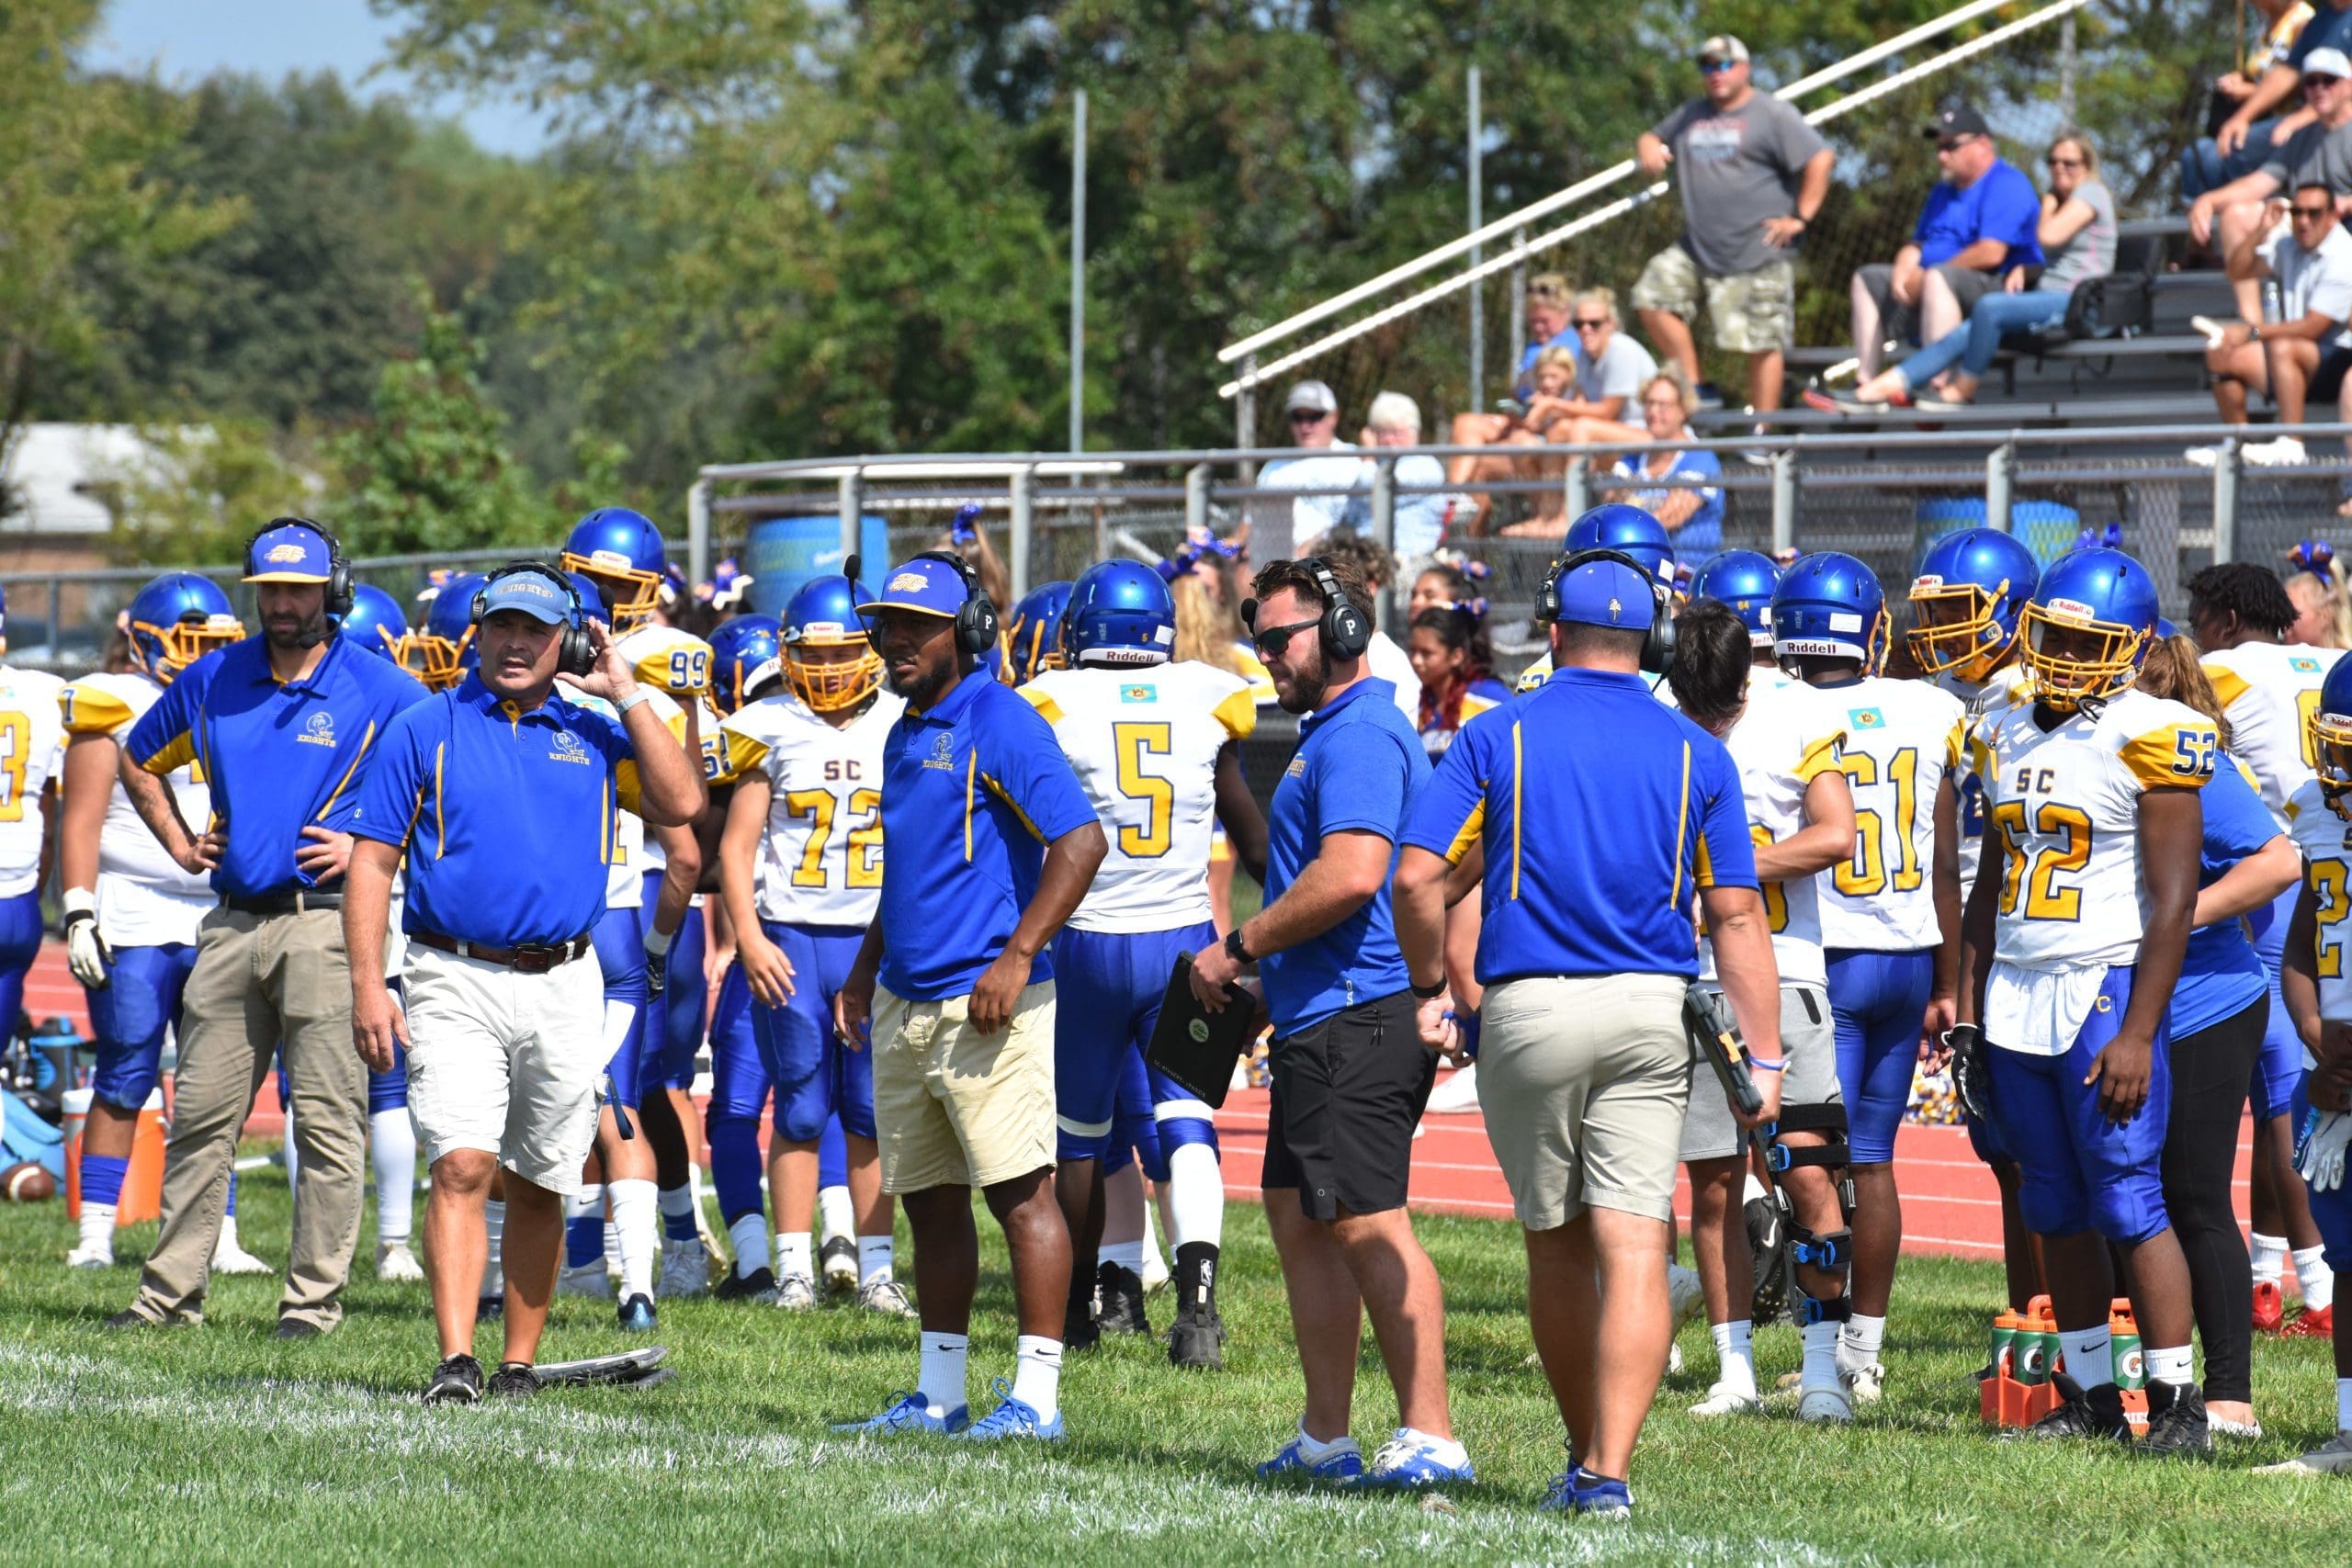 Featured image for “Sussex Central football advances”